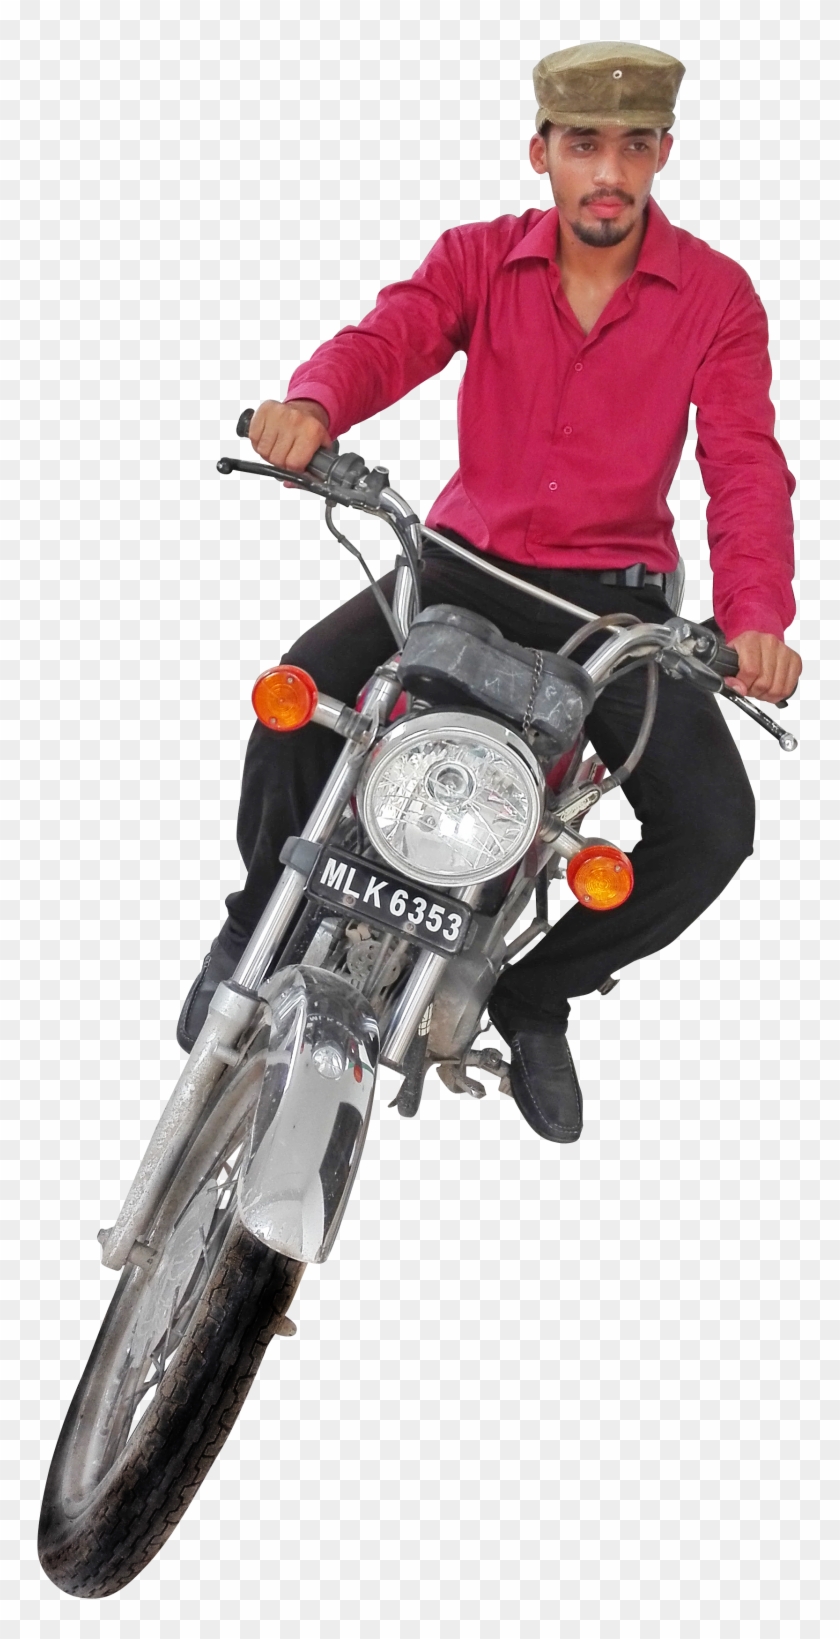 Indian Boy On A Motorbike Clipart #524728